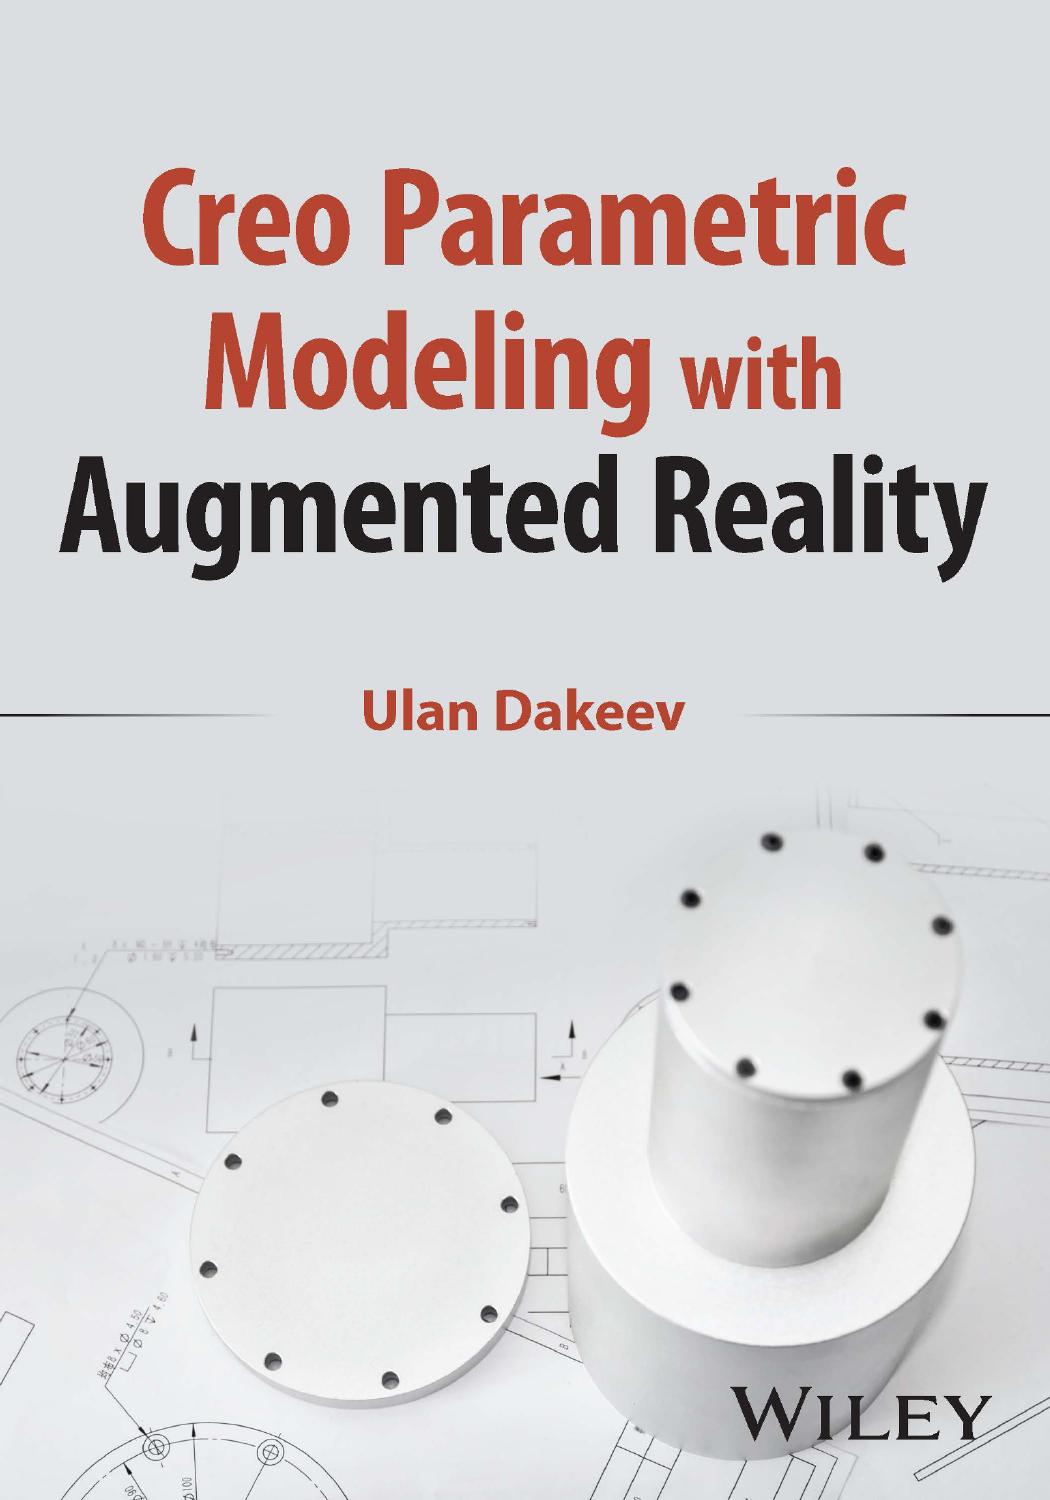 Creo Parametric Modeling with Augmented Reality by Ulan Dakeev